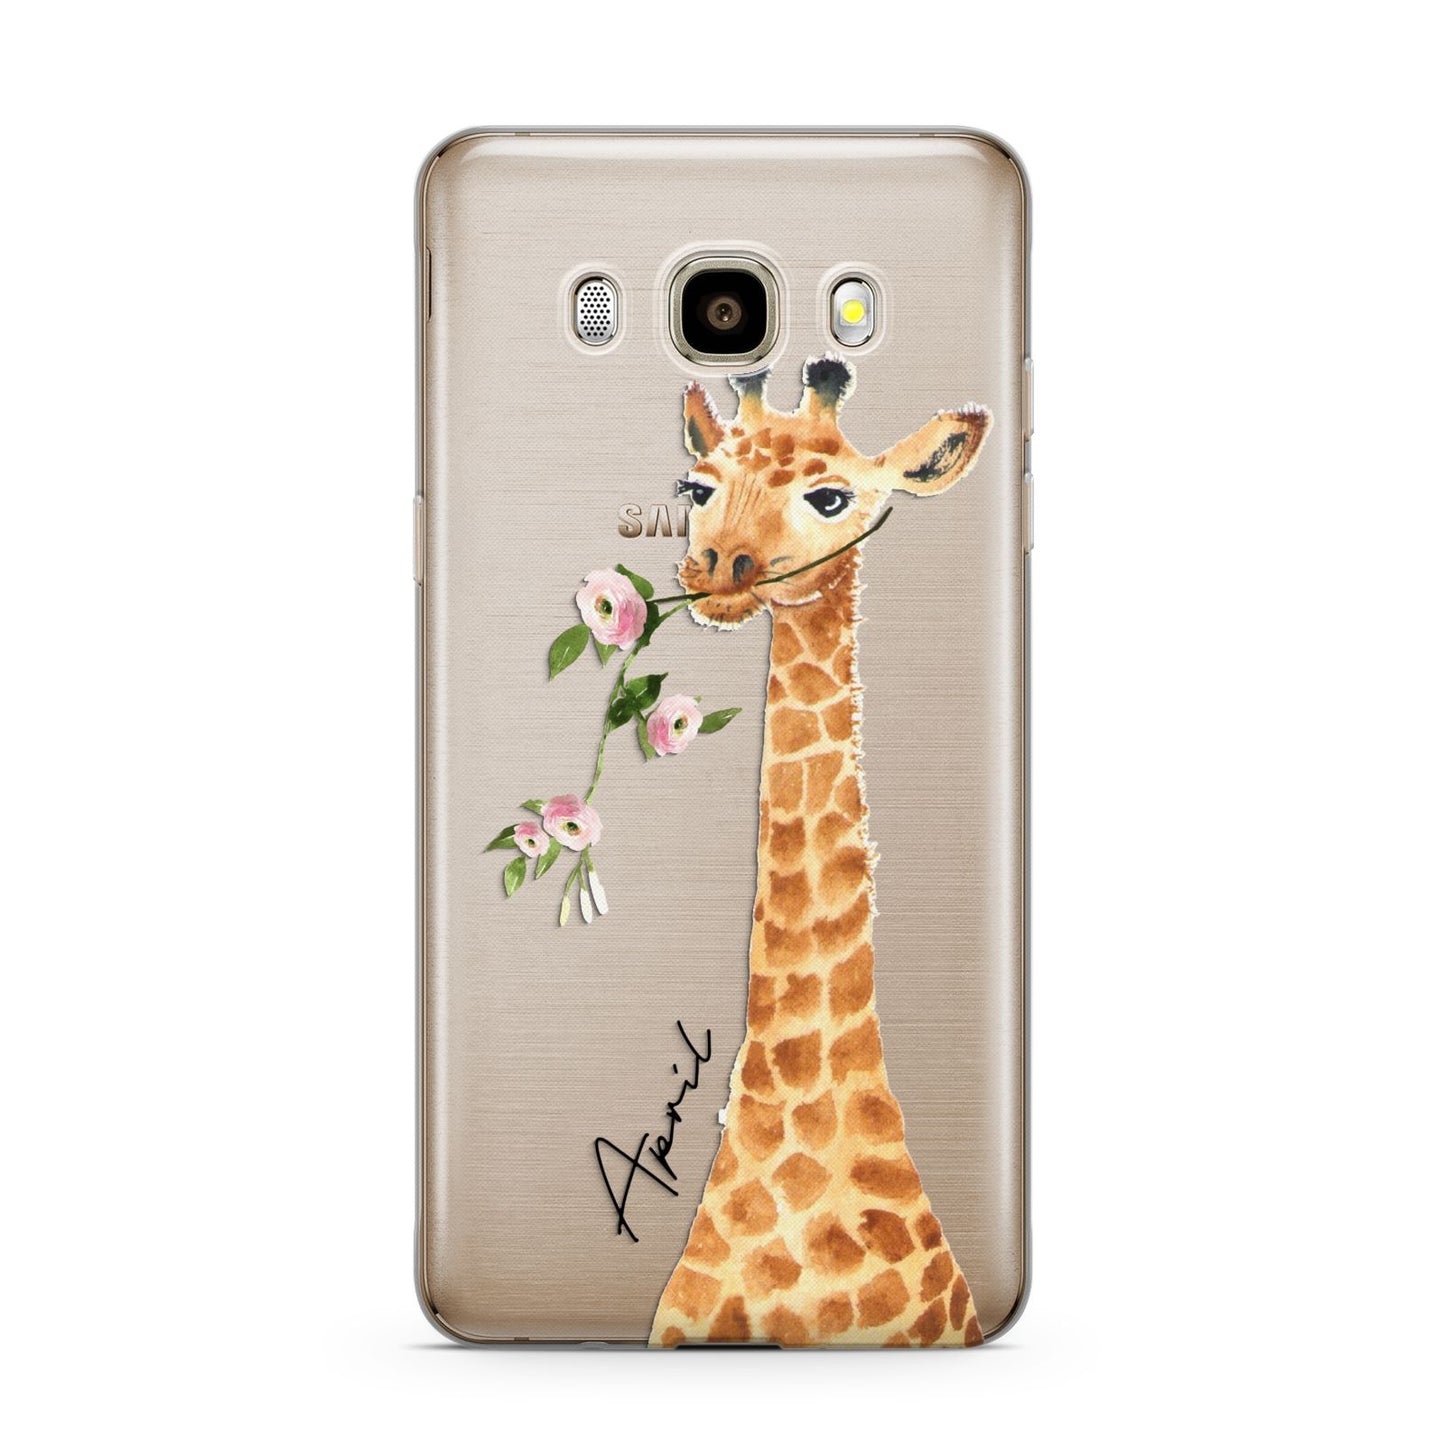 Personalised Giraffe with Name Samsung Galaxy J7 2016 Case on gold phone